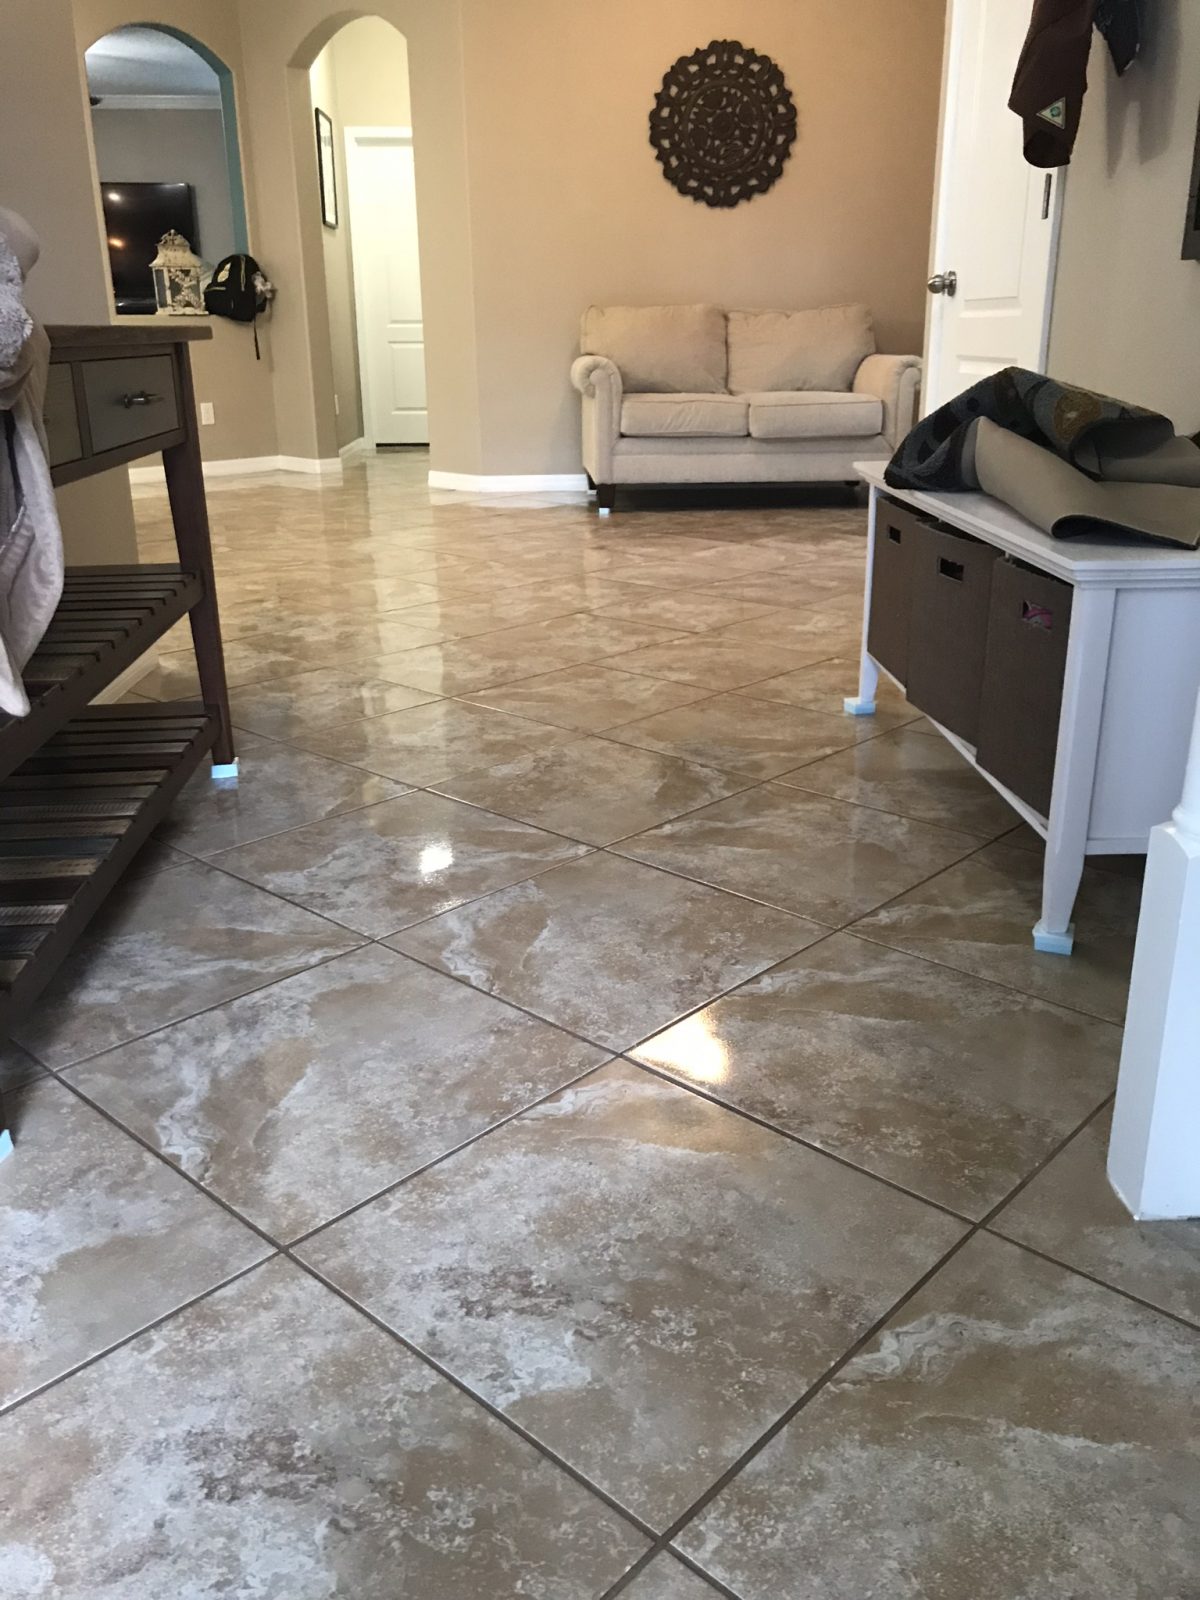 Professional Tile & Grout Cleaning Odessa Florida by Howards Cleaning Service